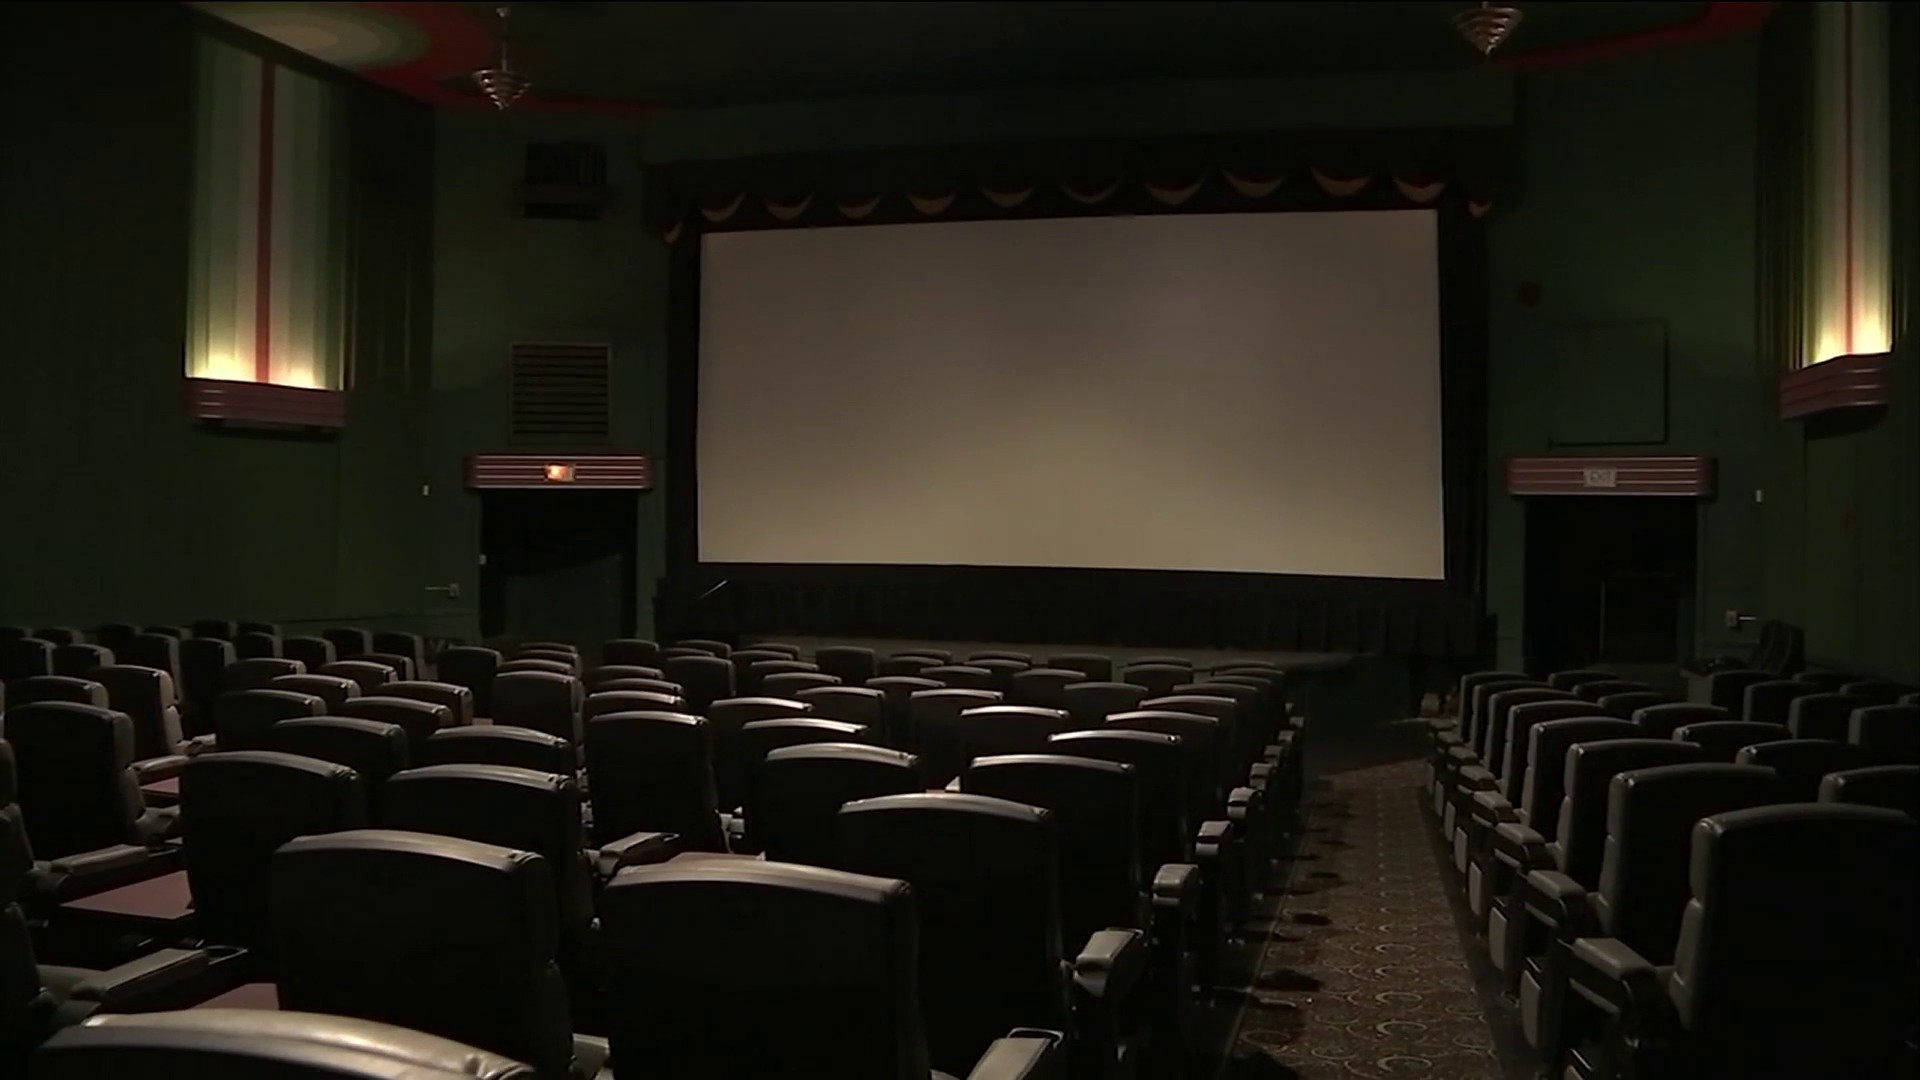 Florida Movie Theaters Can Reopen Doors Friday Under Desantis Phase 2 Plan